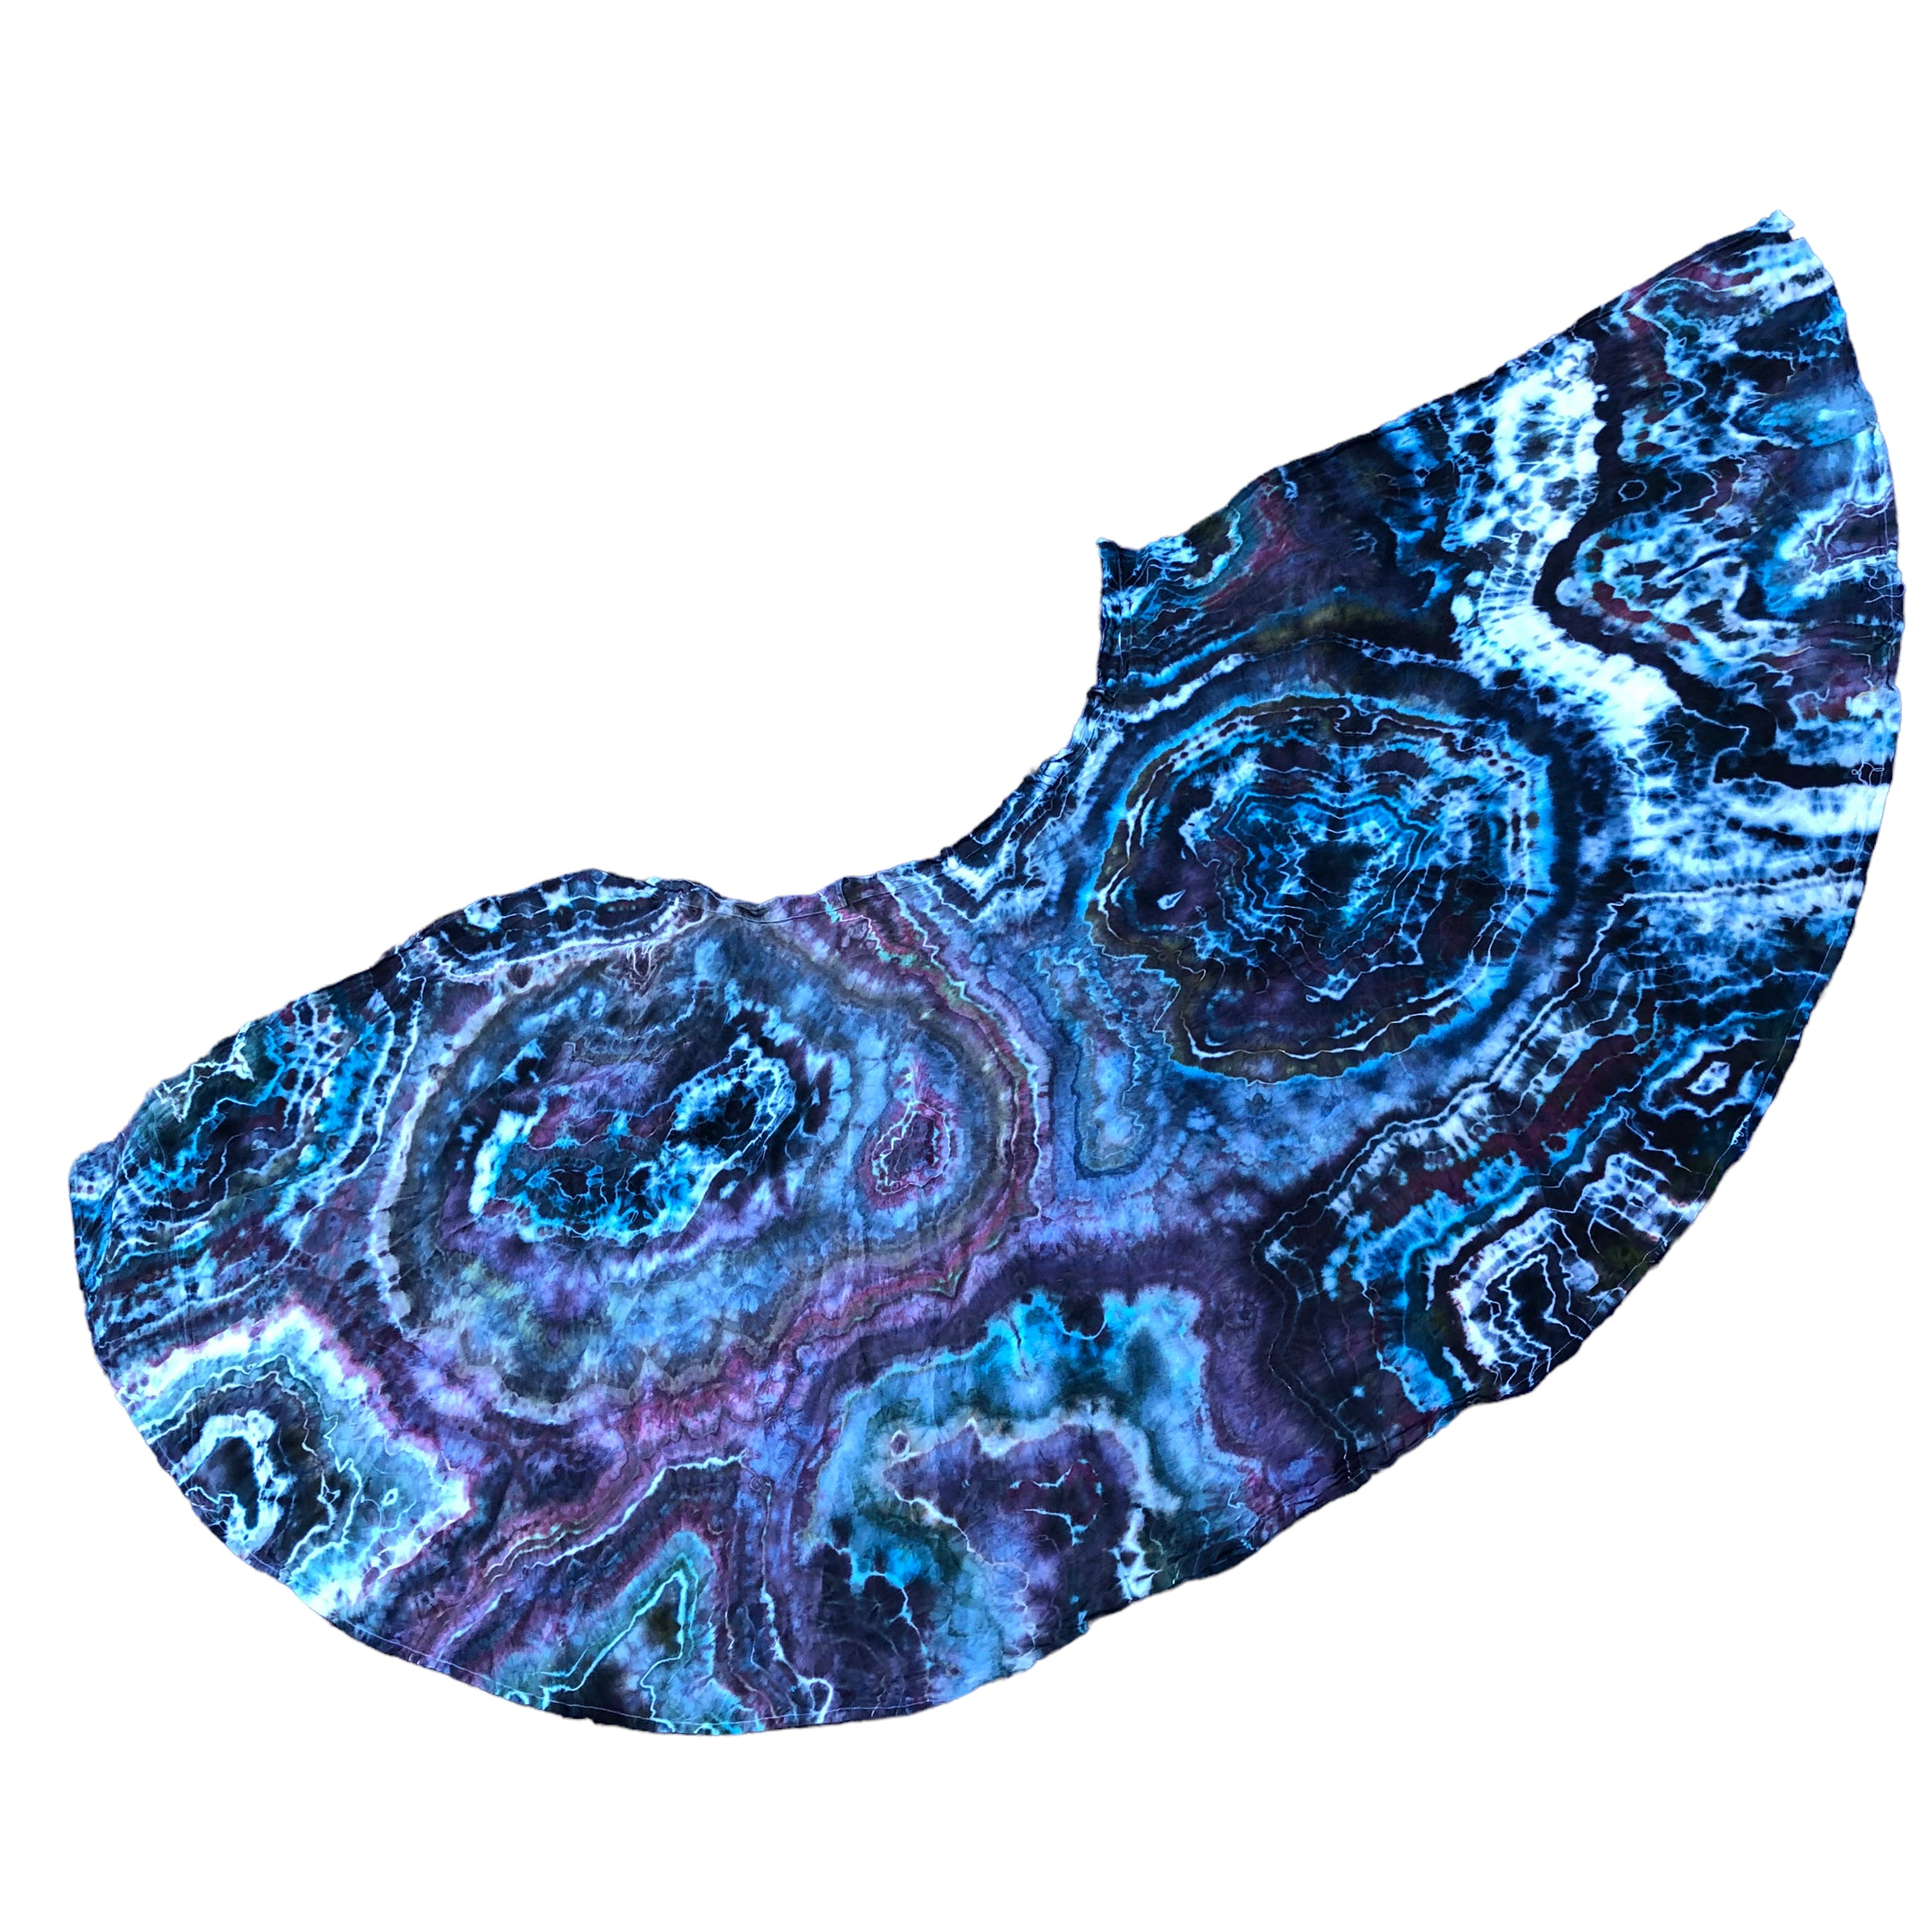 Geode Wrap Skirt - ice dyed couture, one of a kind